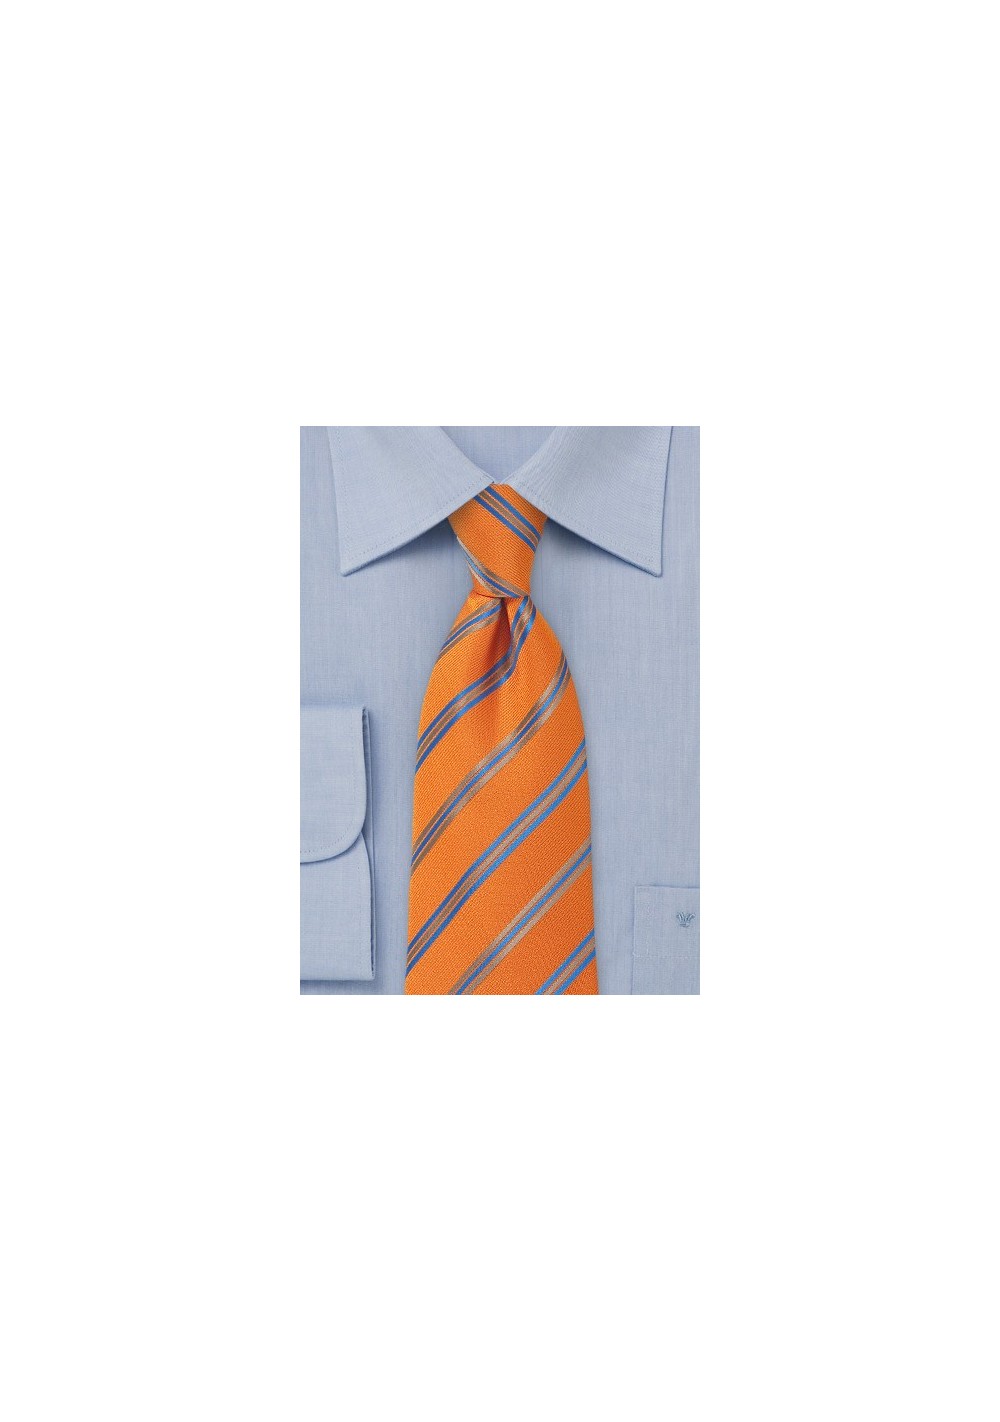 Tangerine Orange Striped Tie with Blue and Taupe Accents